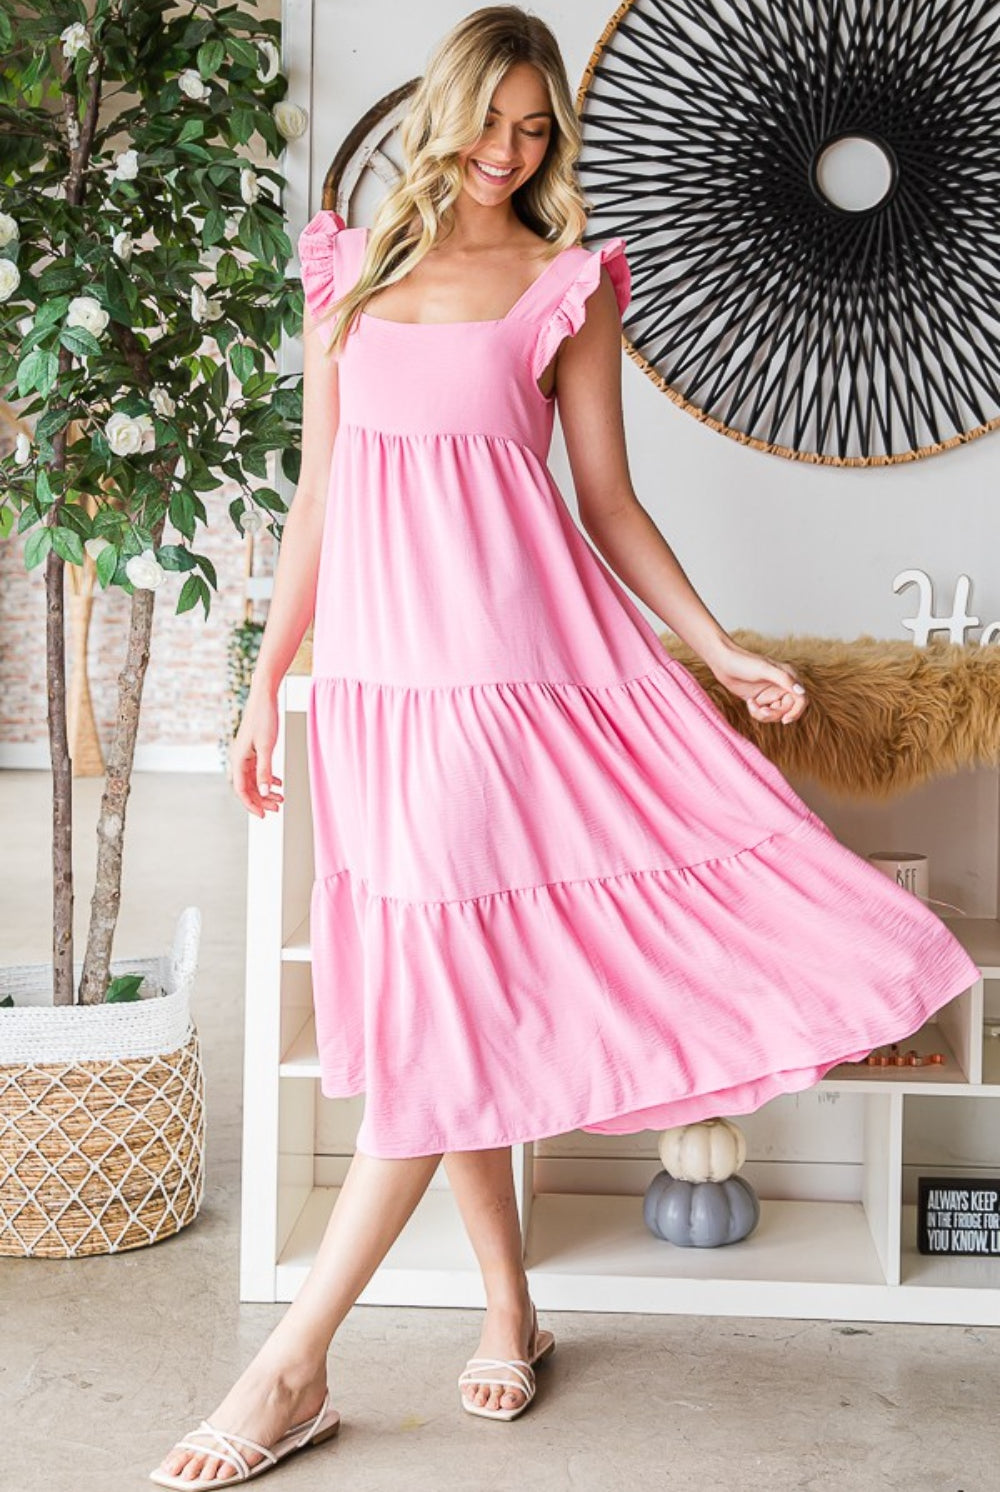 A smiling woman looks radiant in a blush pink ruffle tiered midi dress, which exudes summer charm with its flouncy sleeves and flowing skirt, complemented by white slide sandals.